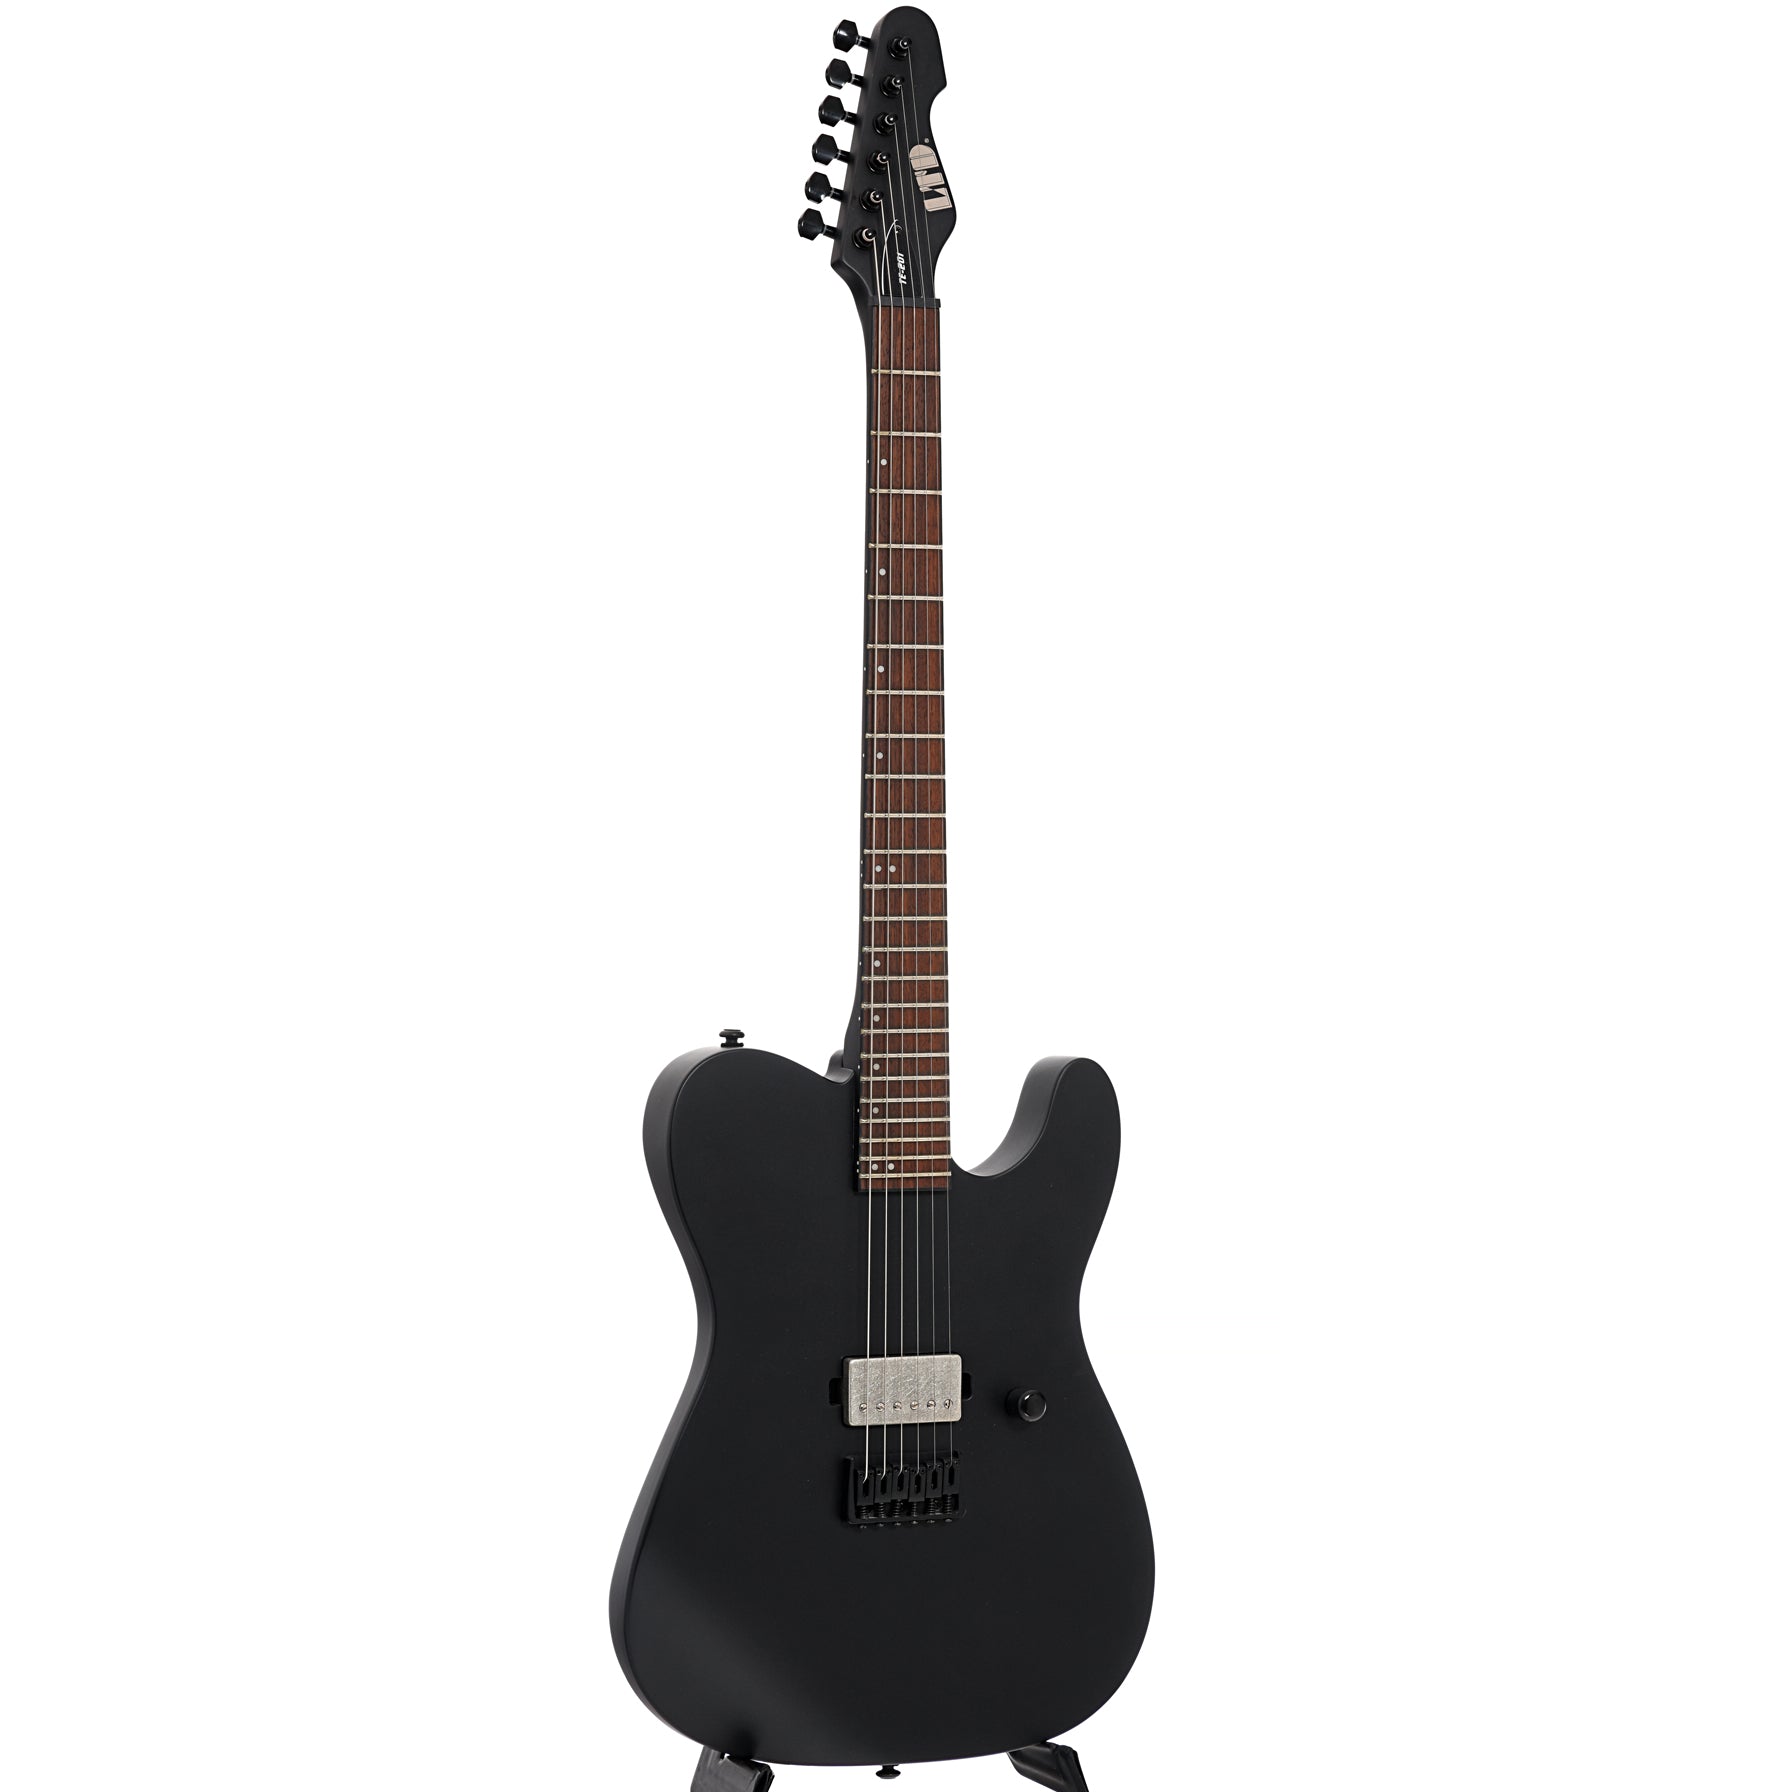 Products - Thinline Series Guitars - The ESP Guitar Company